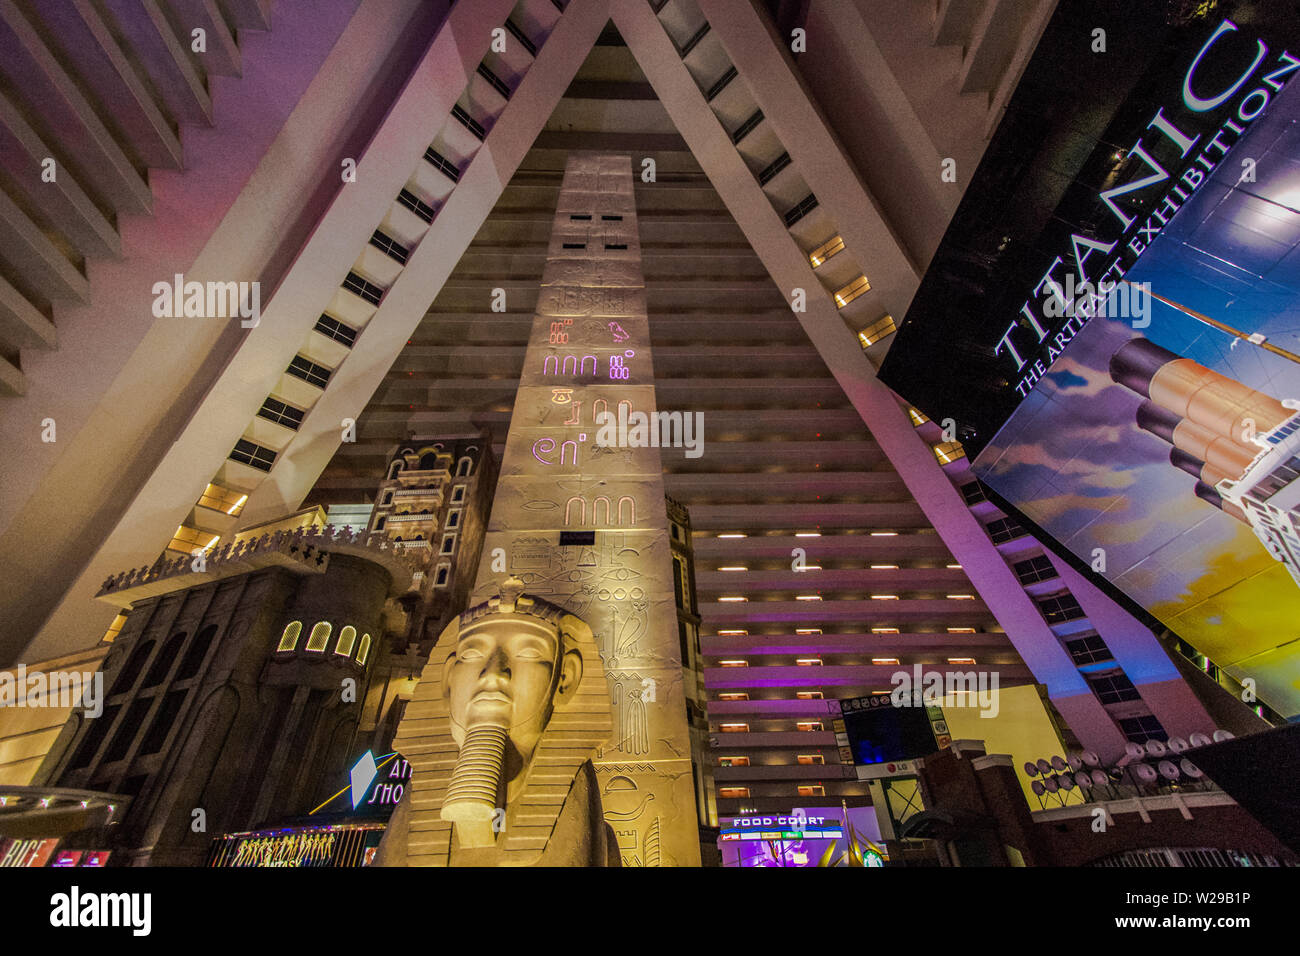 The atrium at the Luxor Hotel in Las Vegas. The Luxor claims to have the largest atrium in the world at 29 million cubic feet. Stock Photo